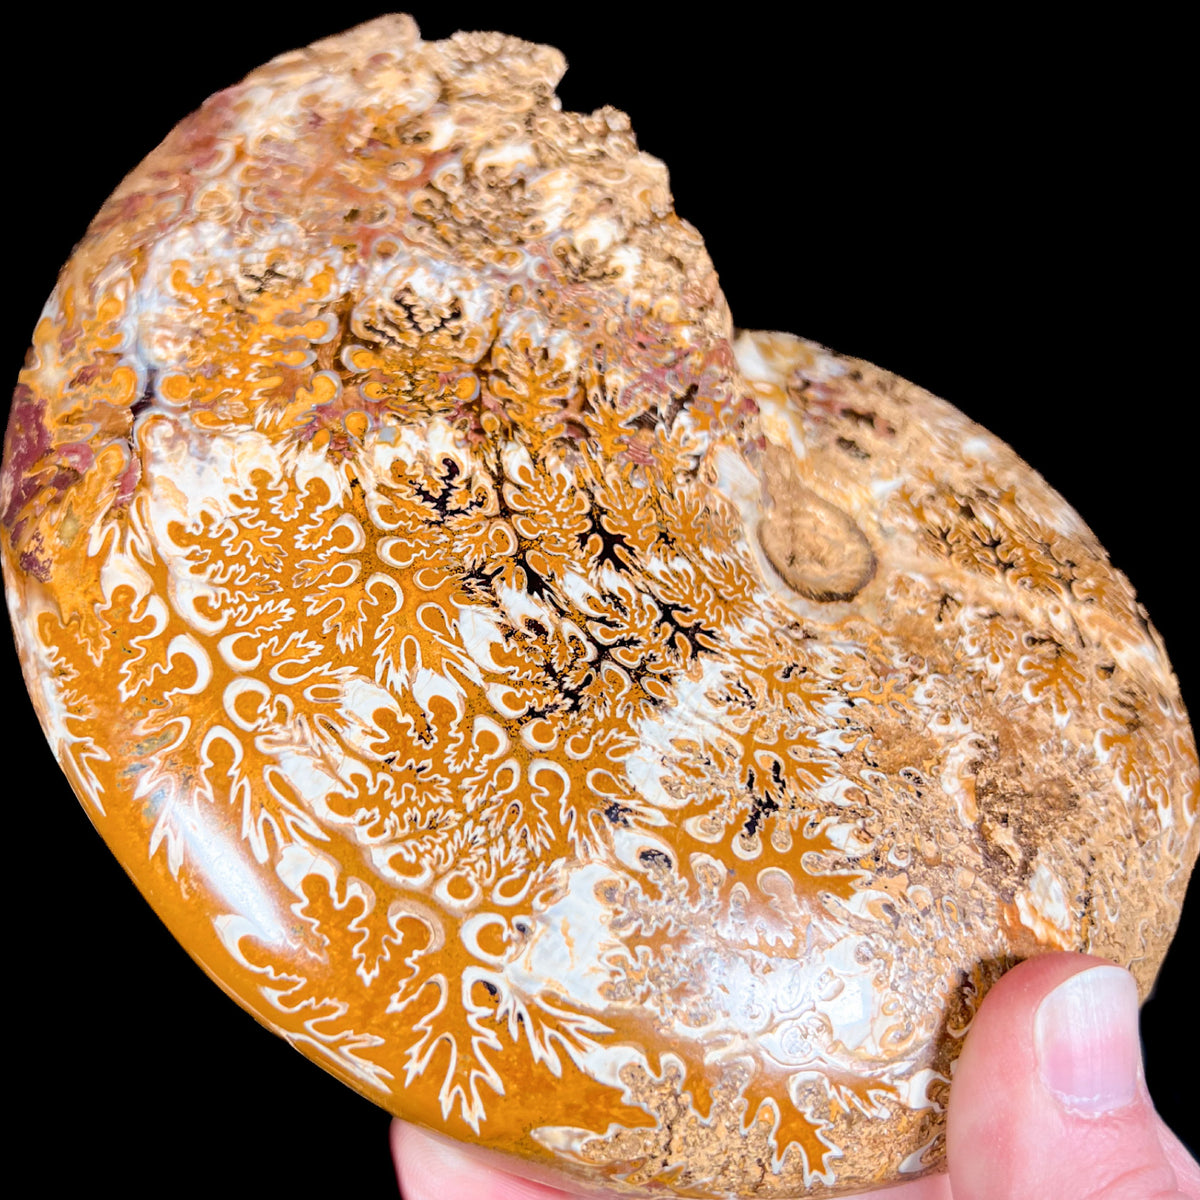 Suture Markings of a Phylloceras Ammonite Fossil